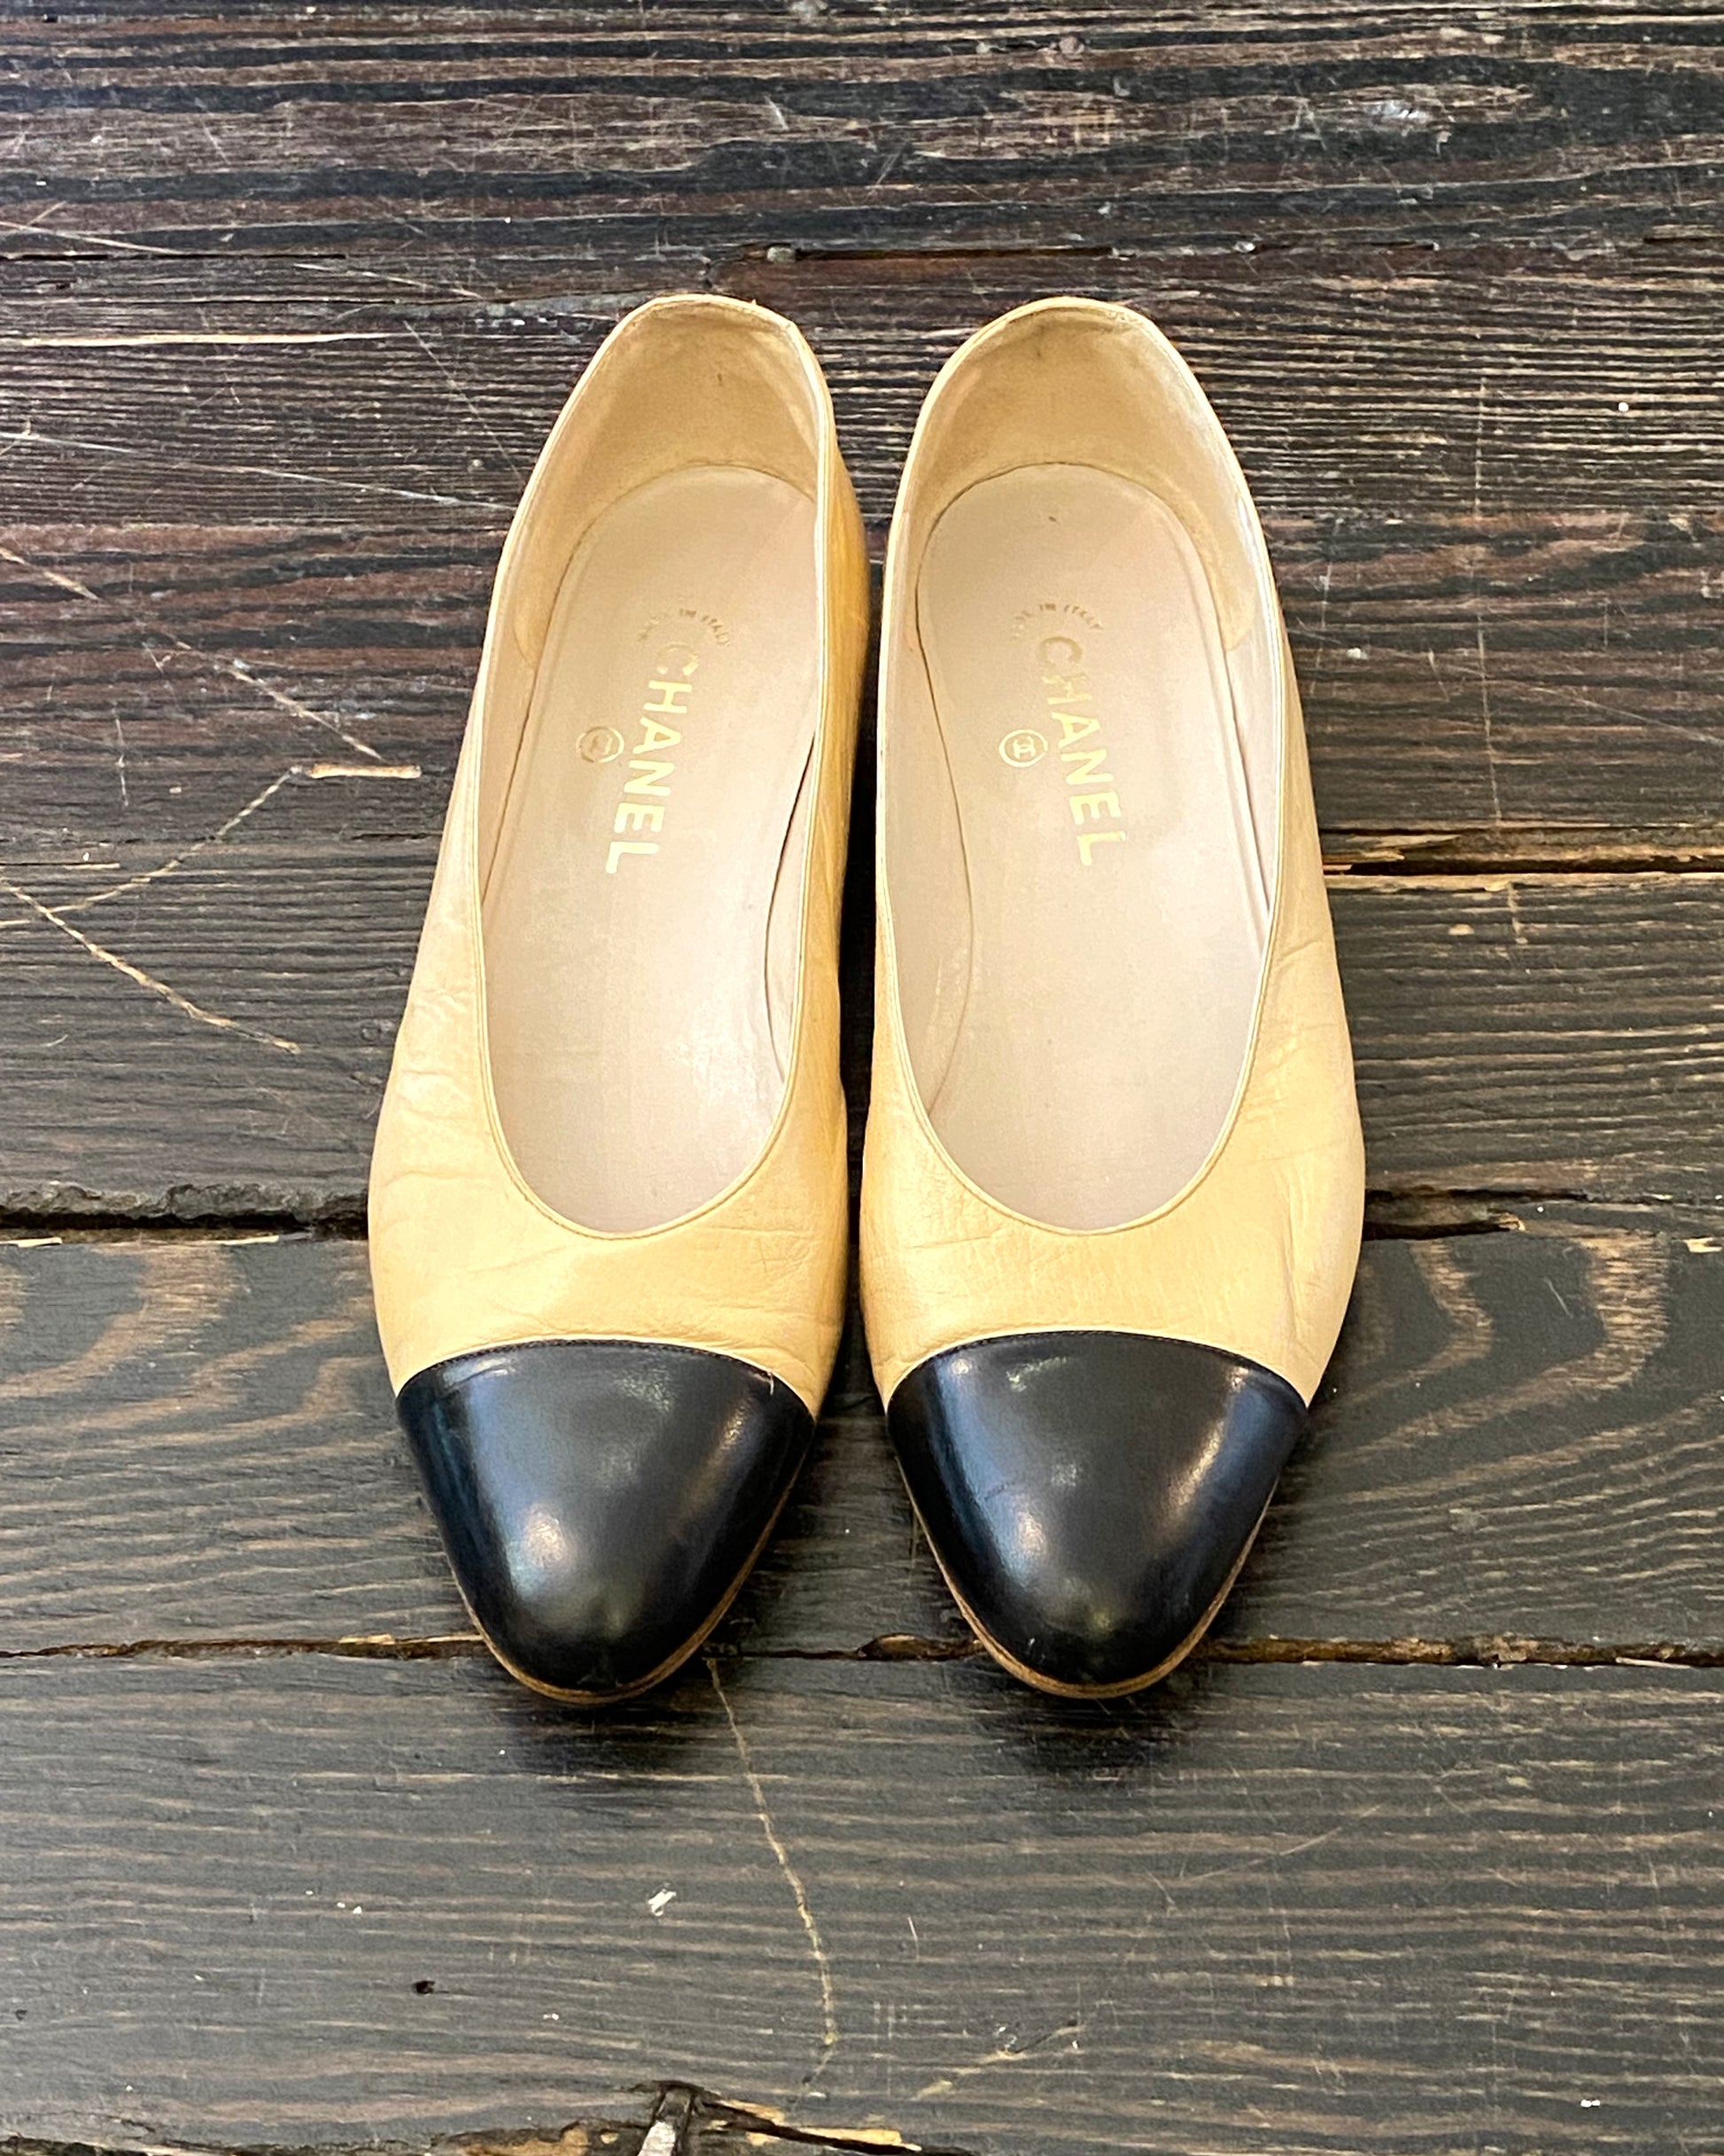 Classic Vintage Chanel Slip On Flat Shoe – Rabbits Nyc, 58% OFF